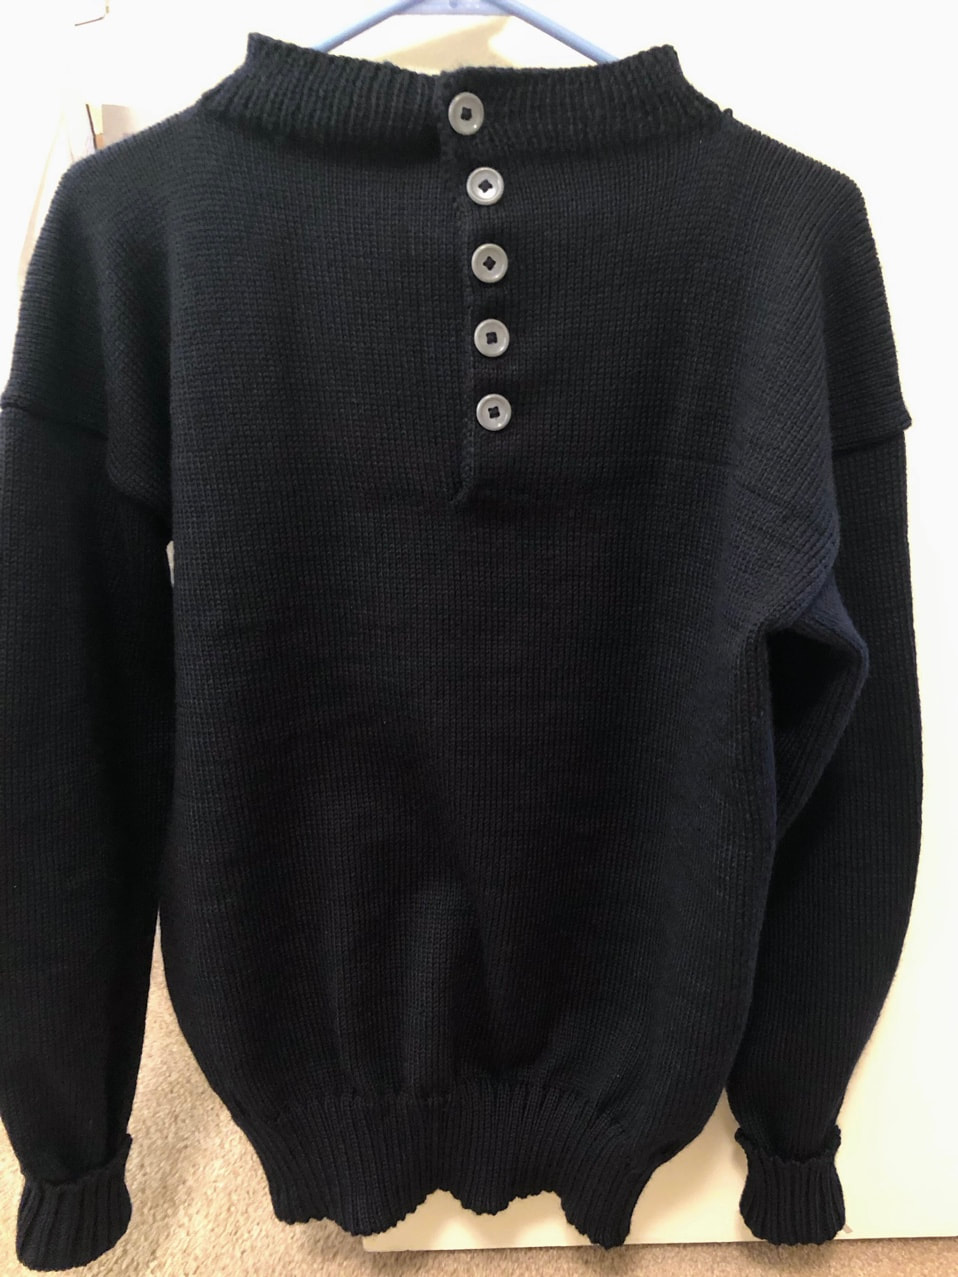 WWI Naval Jersey Sweater Reproduction